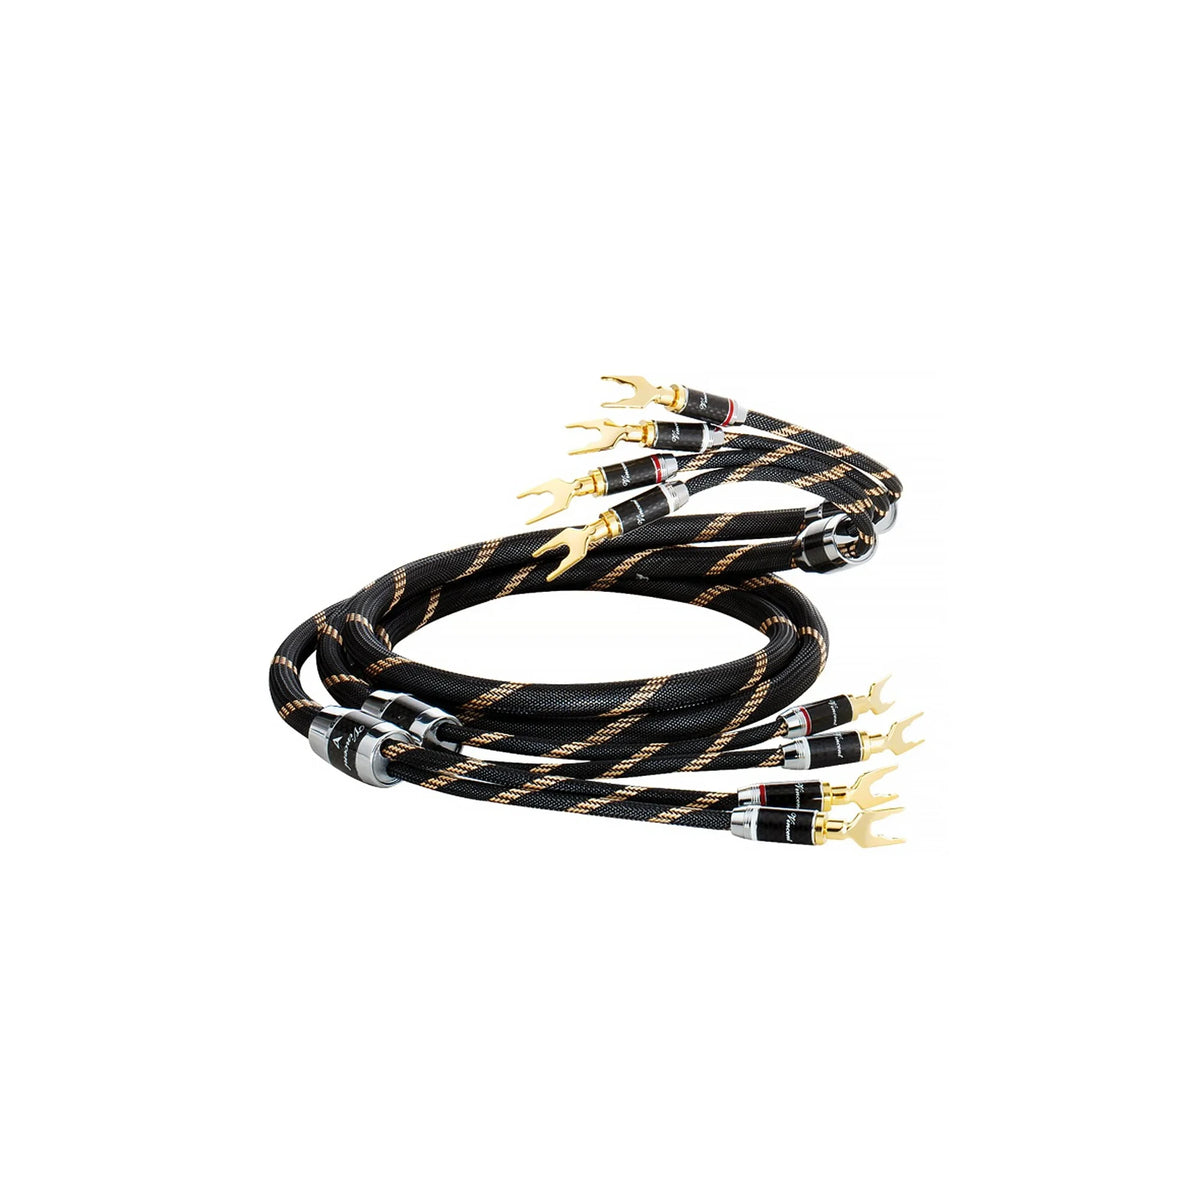 Cables for Audio & Video at Home - The Audio Co.